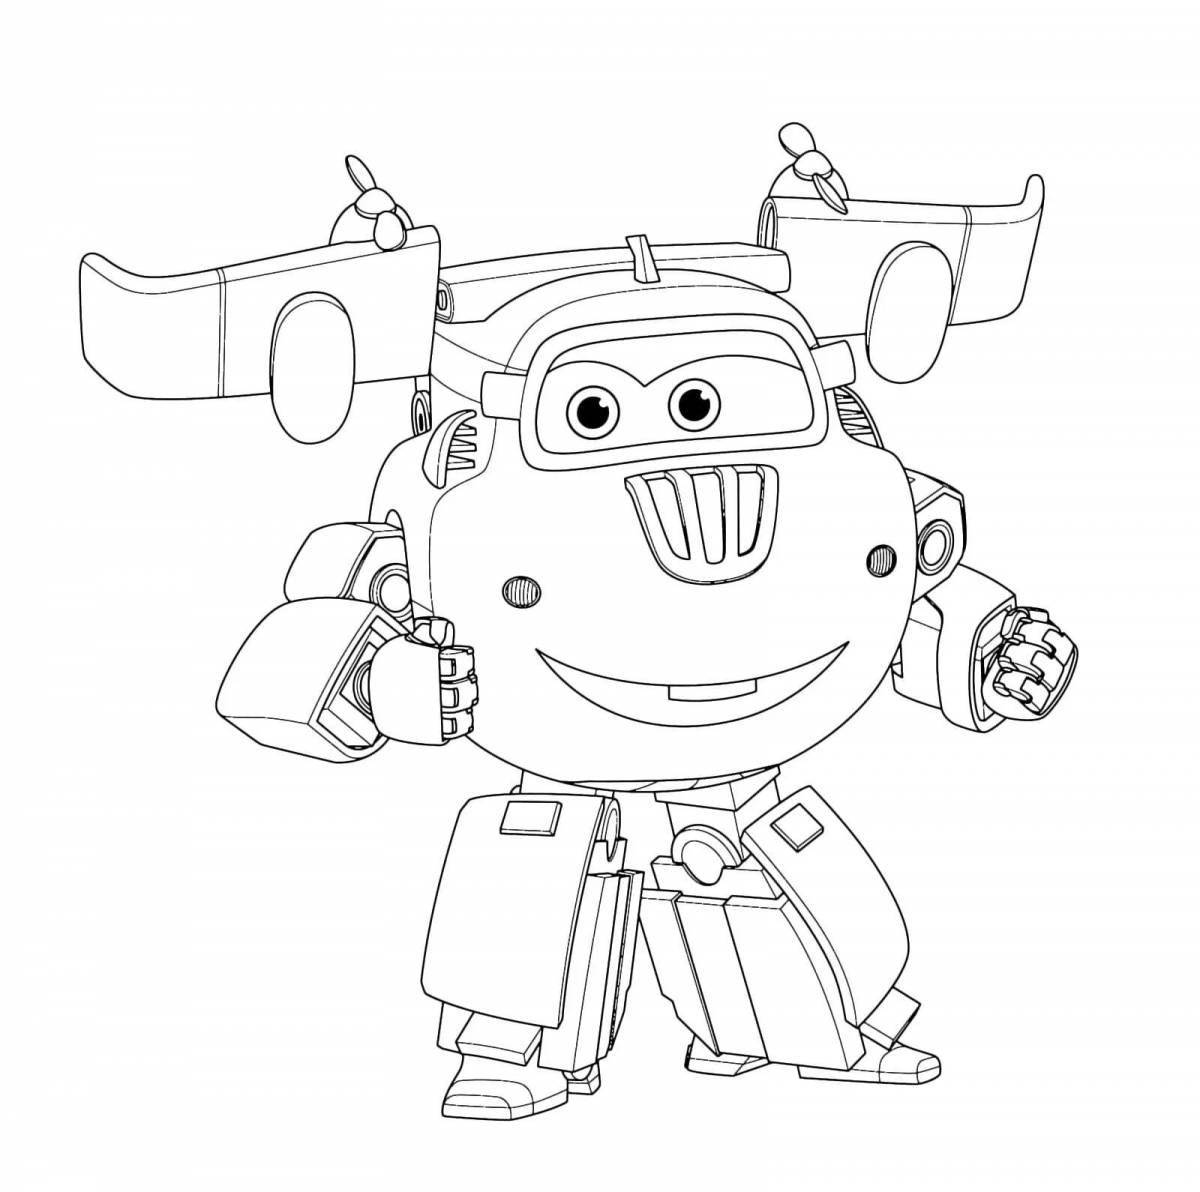 Coloring page impressive superwings and friends